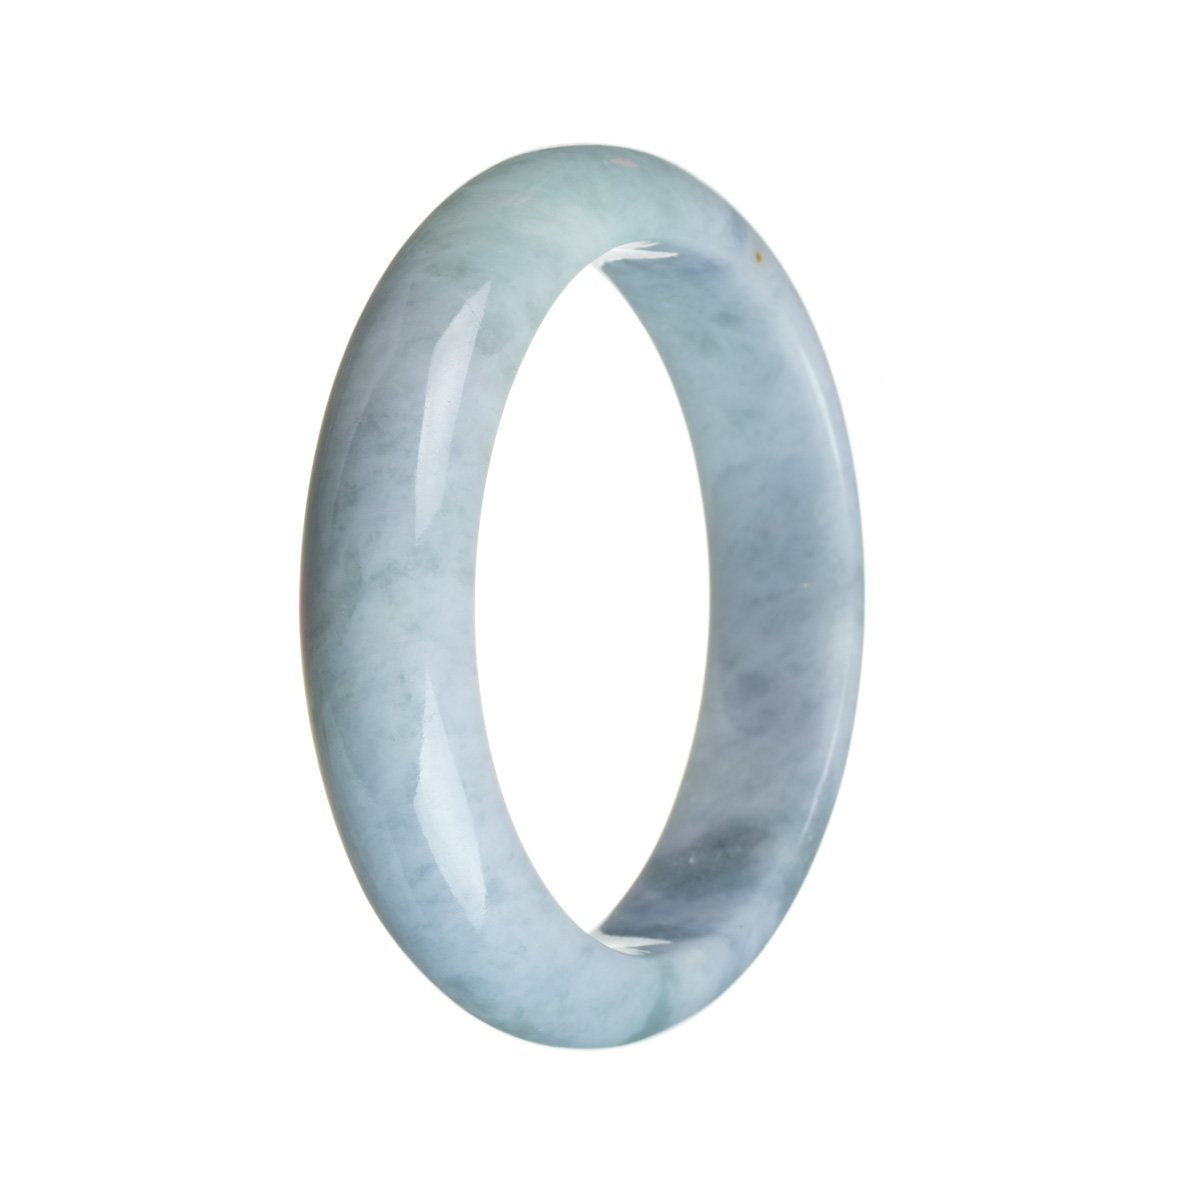 A beautiful bluish lavender Burma jade bangle bracelet with a half moon shape, crafted from genuine, natural jade.